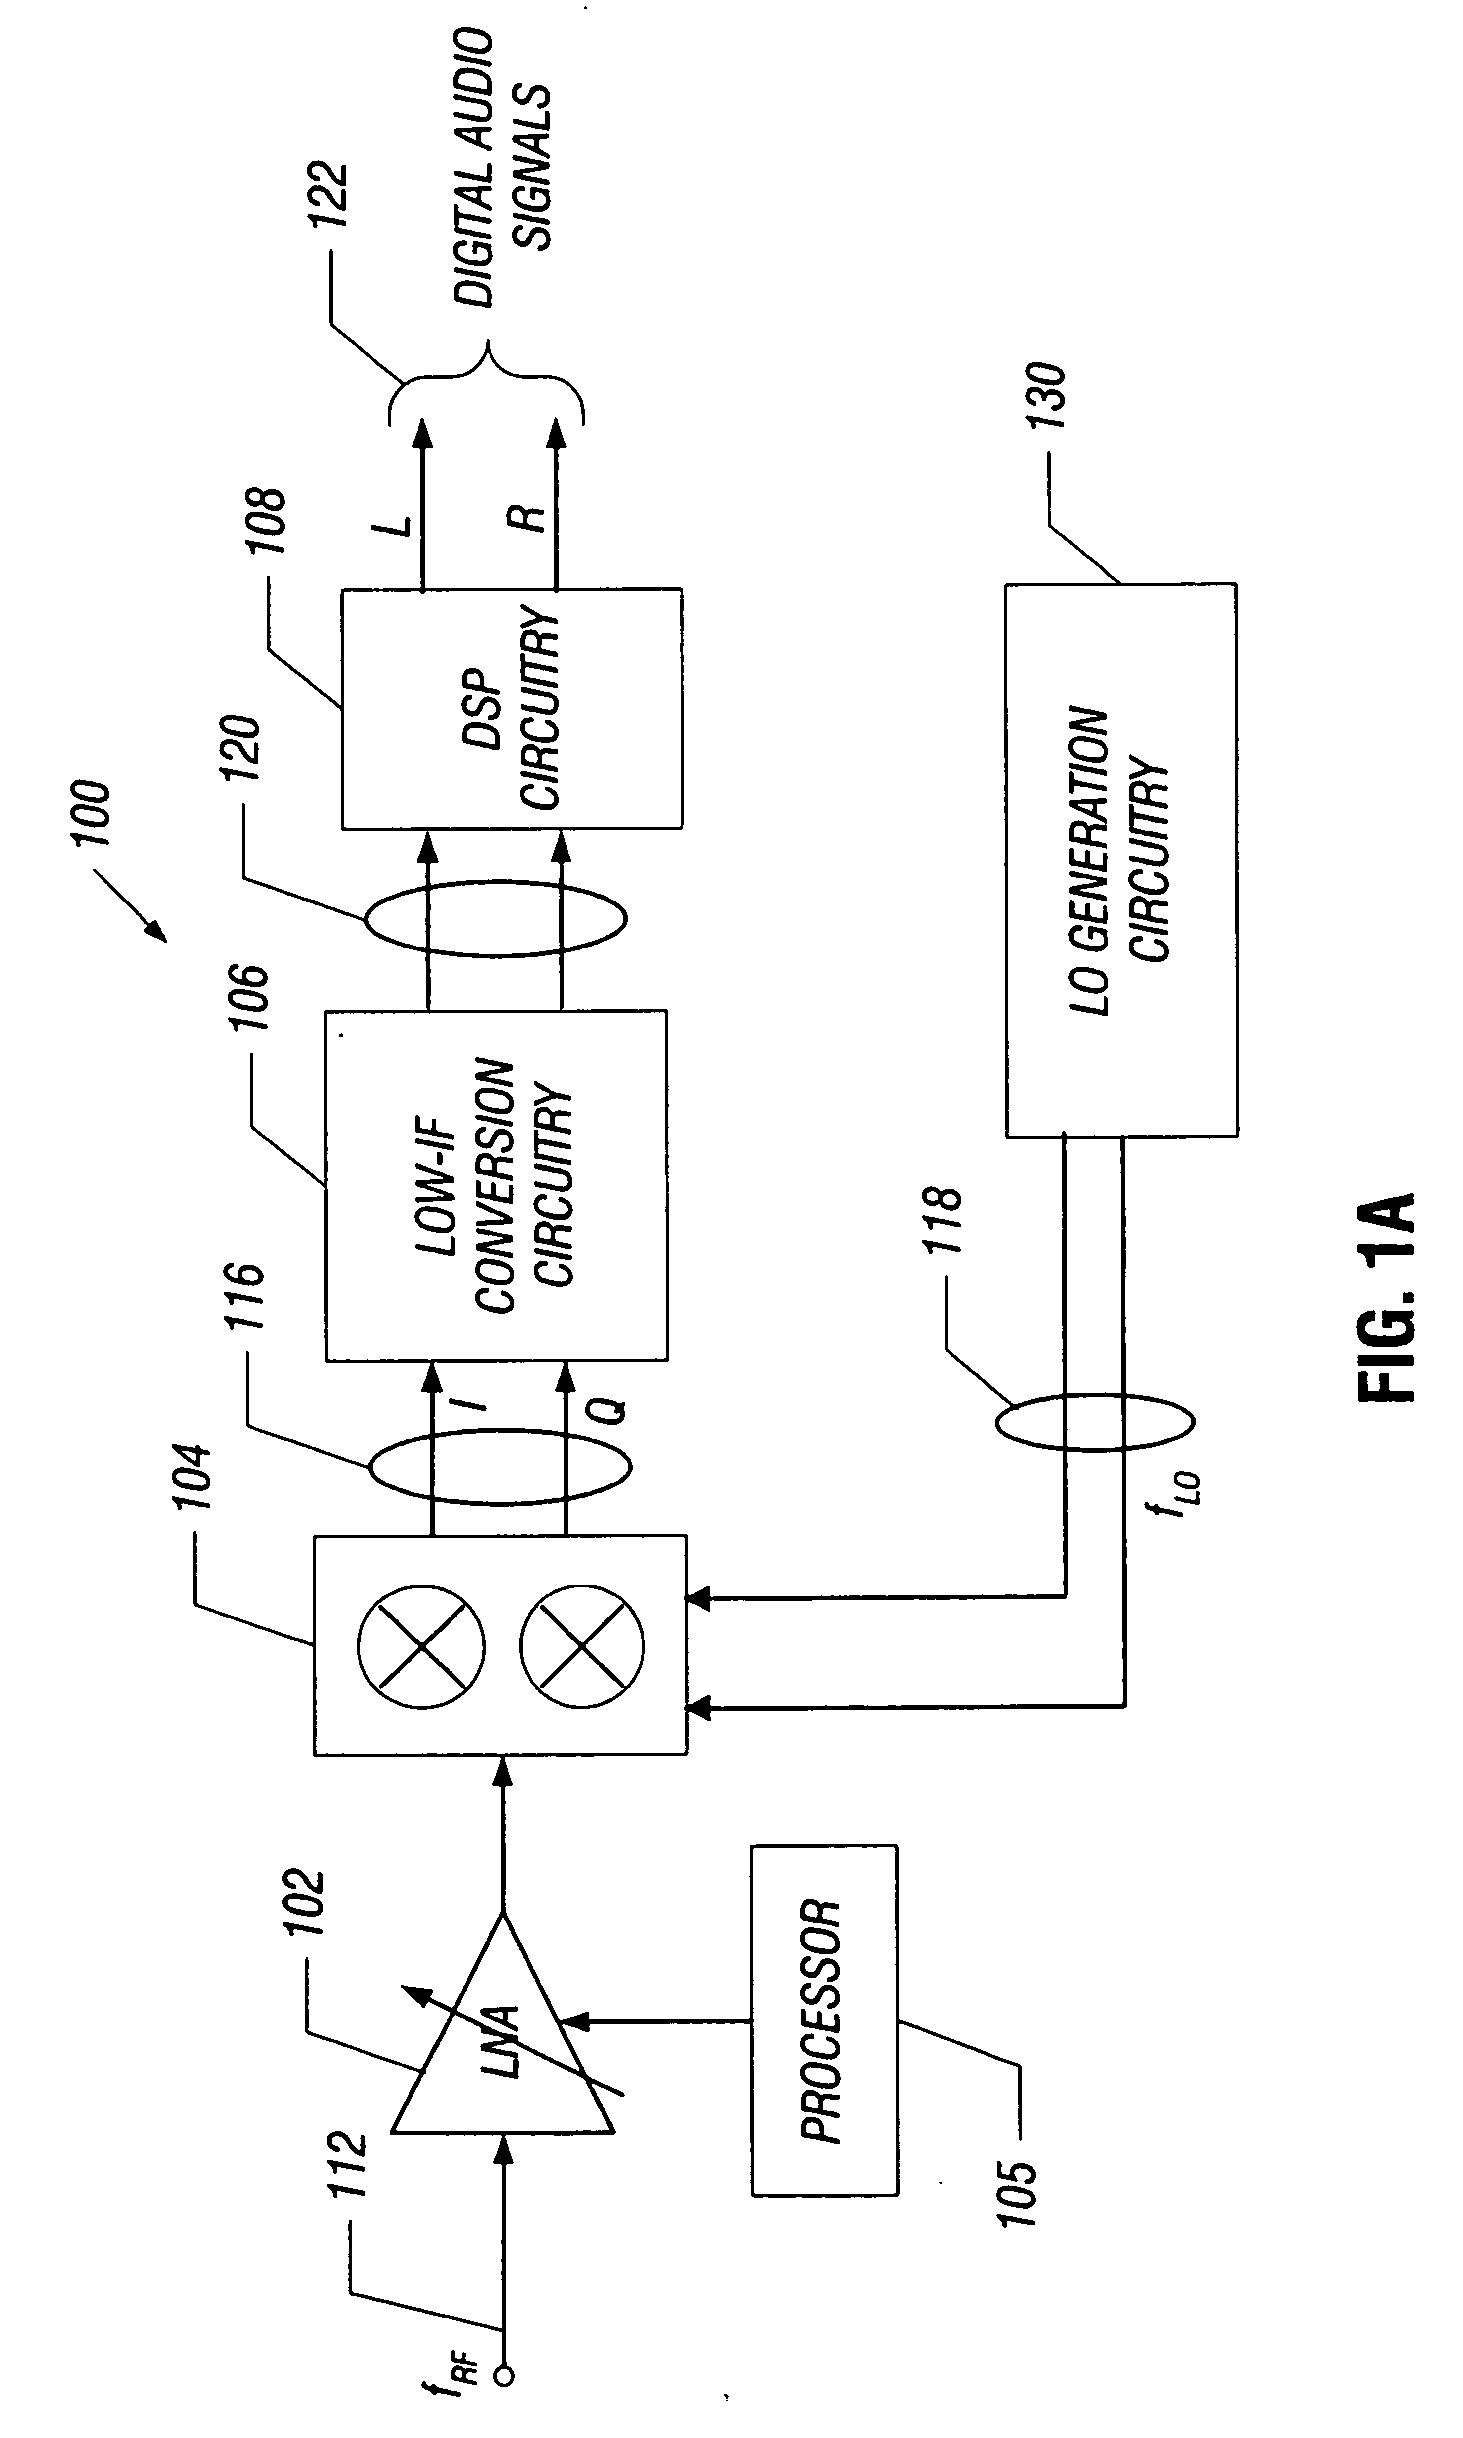 Low noise amplifier for a radio receiver